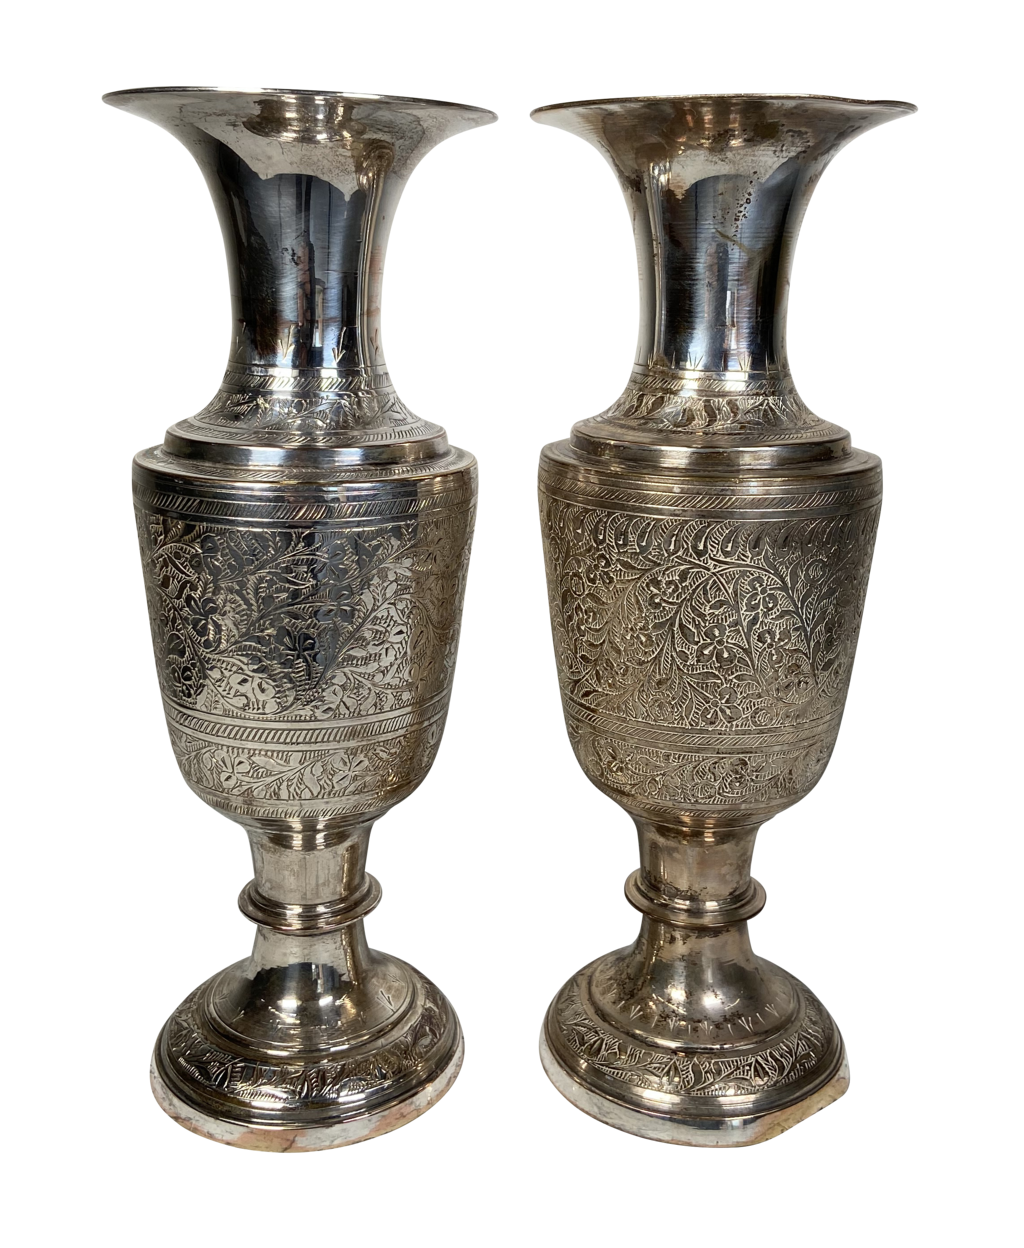 Pair of Anglo-Indian Silver Plated Vases